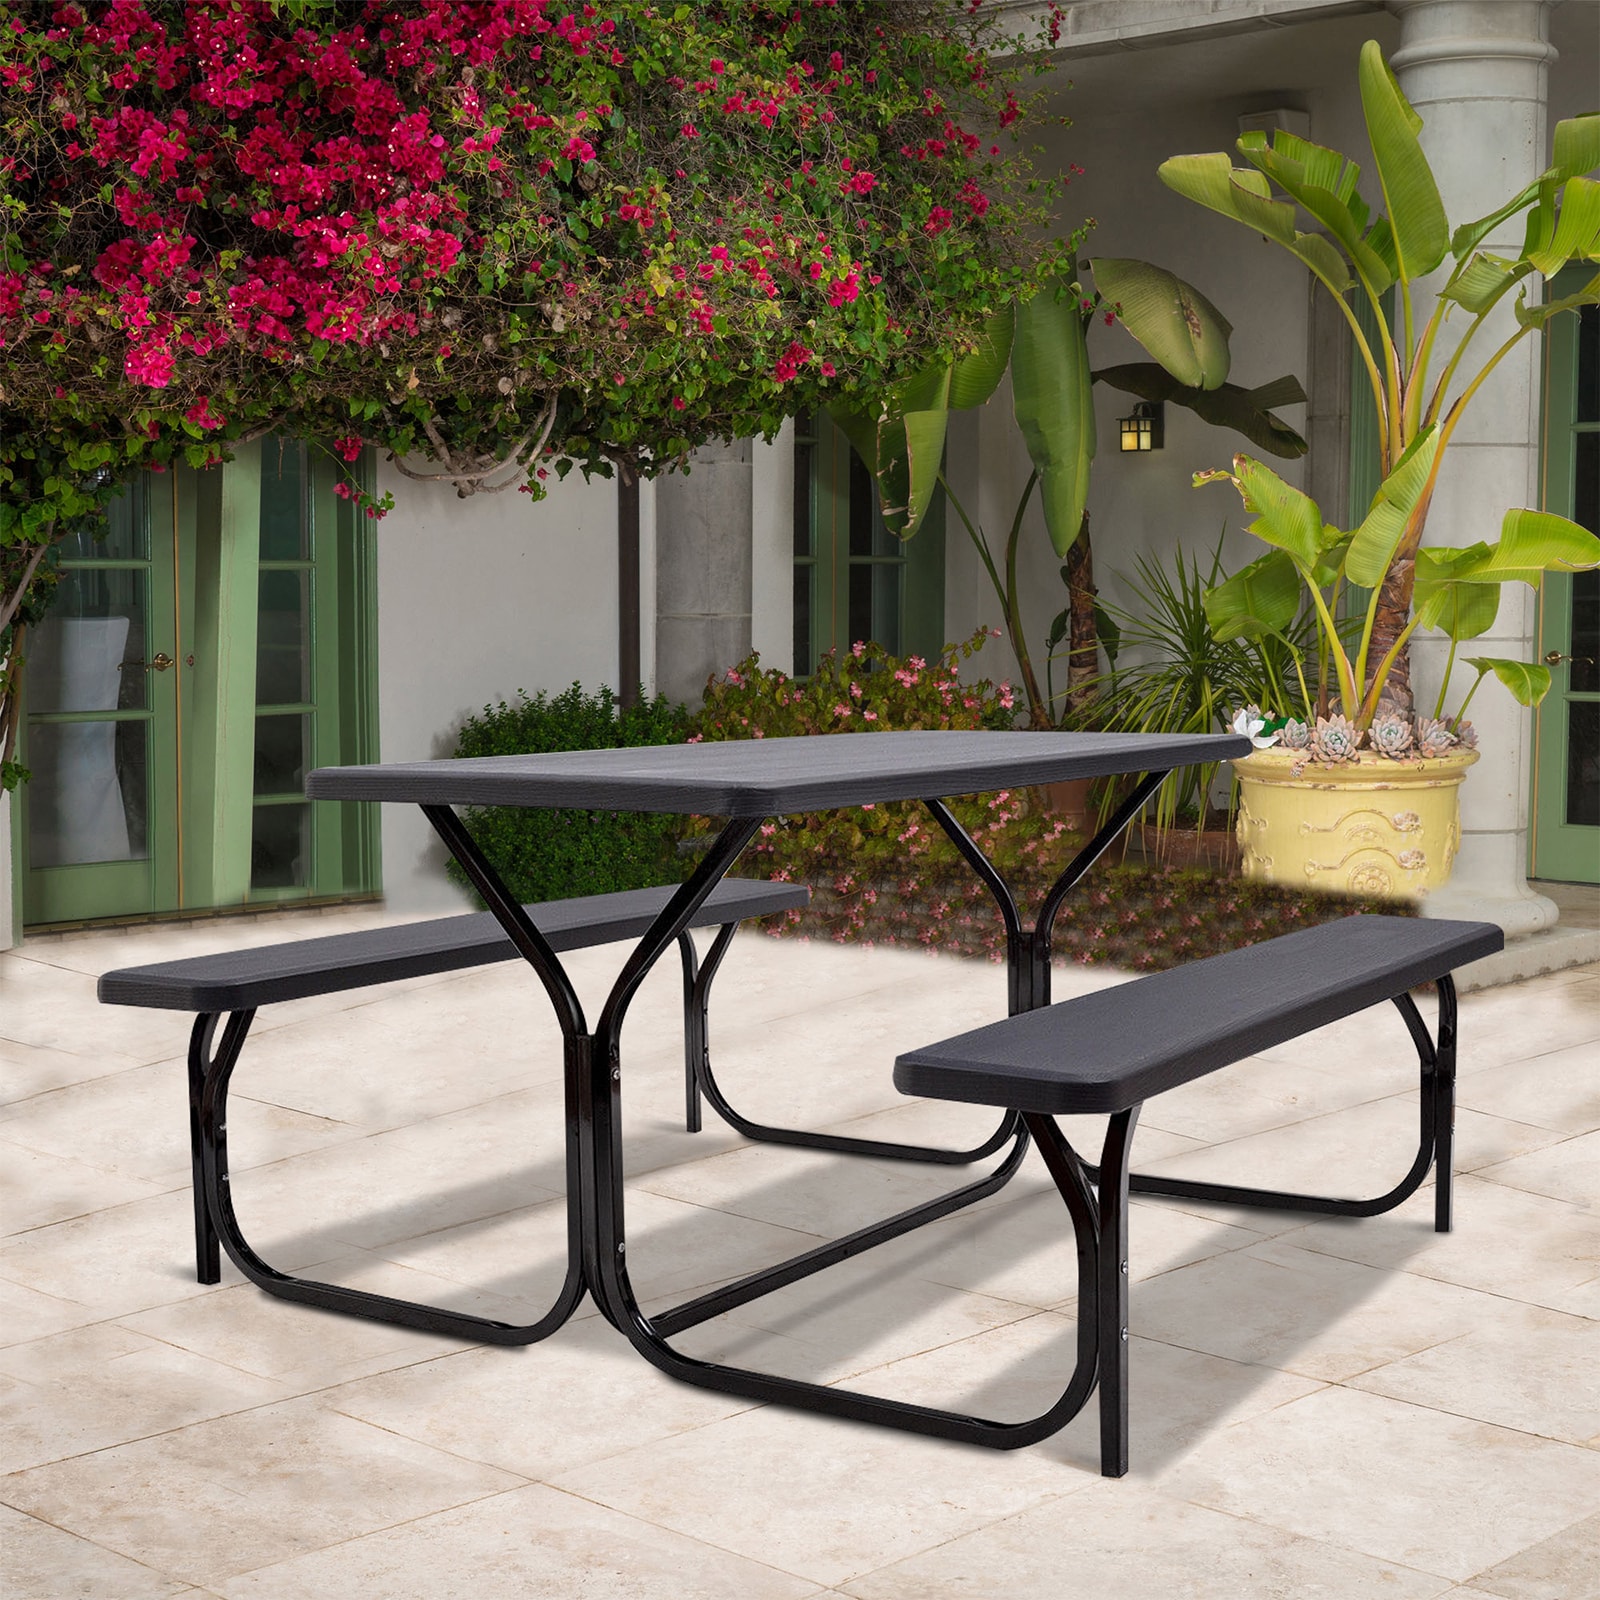 WELLFOR Commercial Grade Black Rectangle Picnic Table with Attached ...